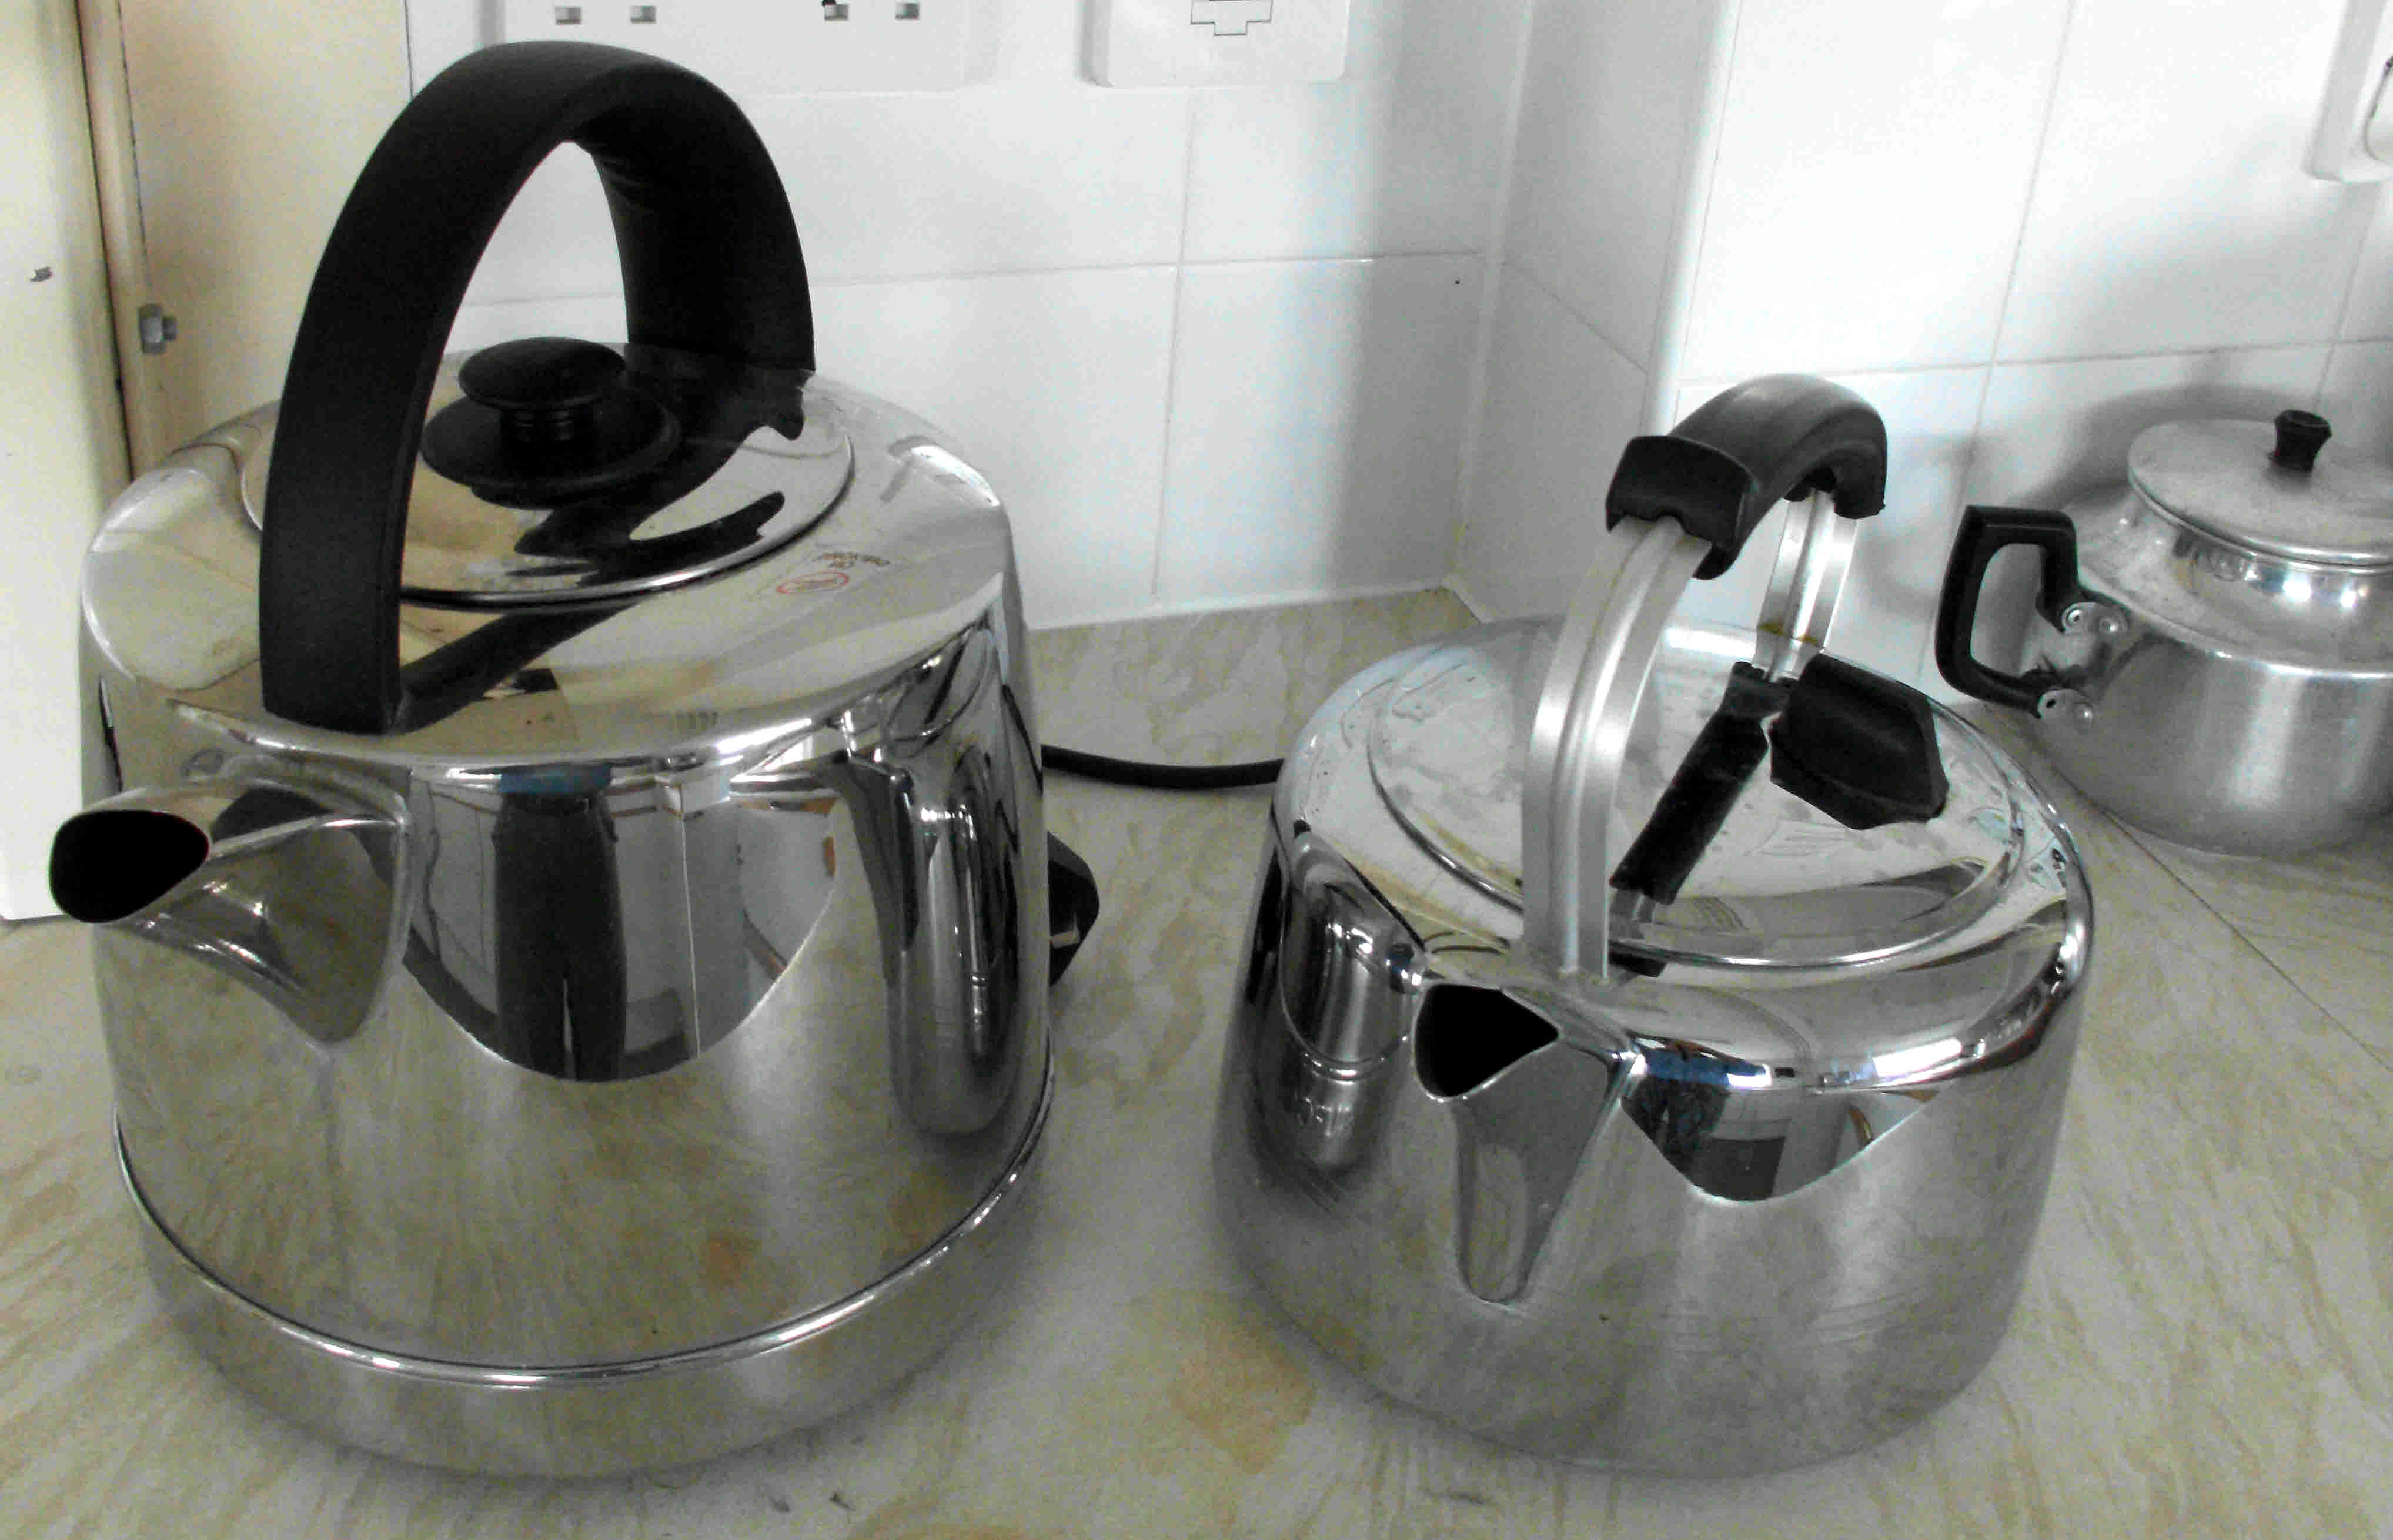 Kettles in kitchen of Letterston Memorial Hall